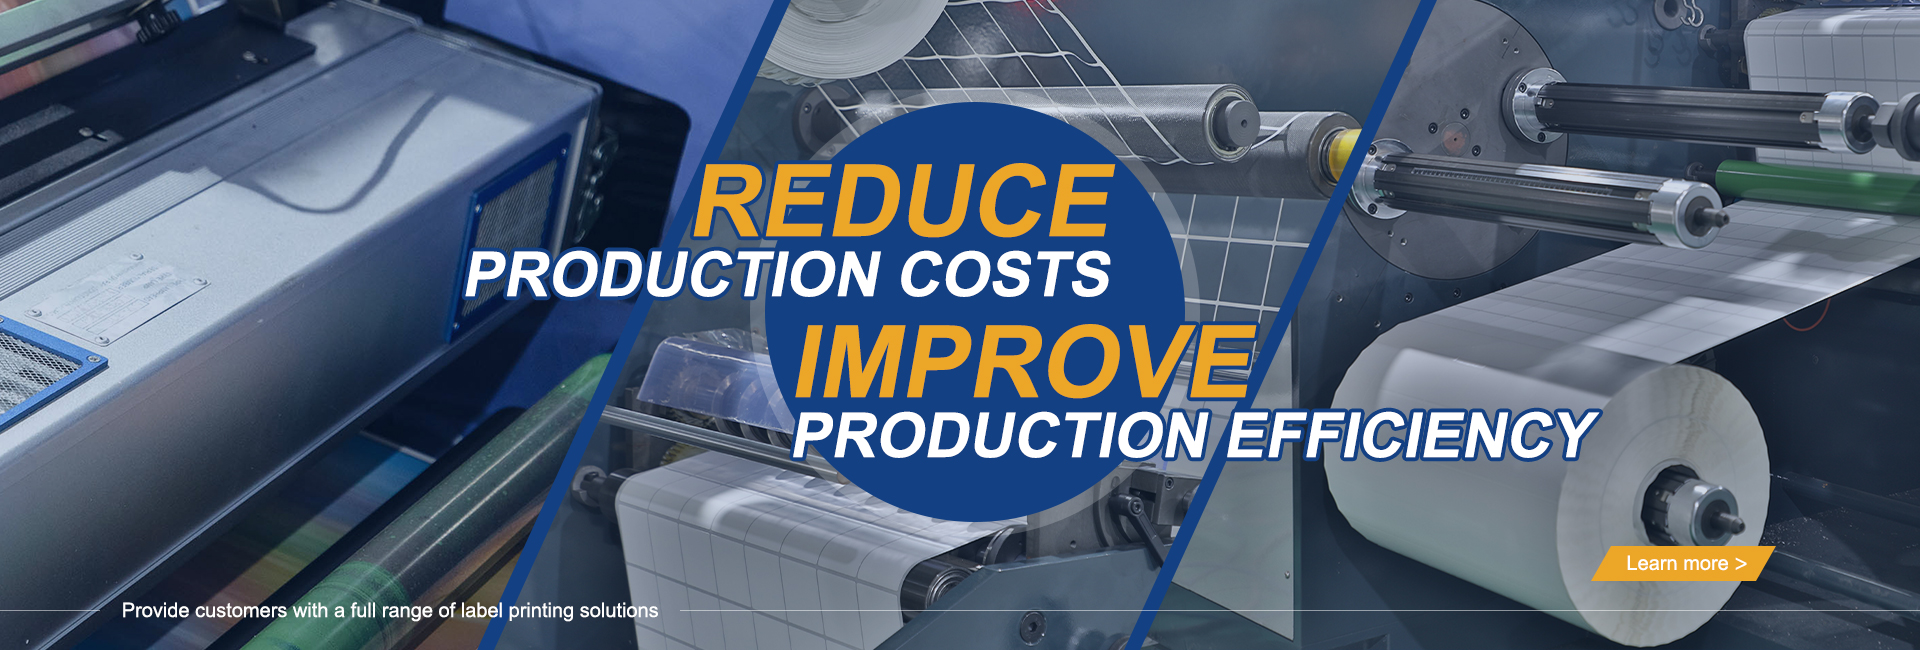 REDUCE PRODUCTION COSTS